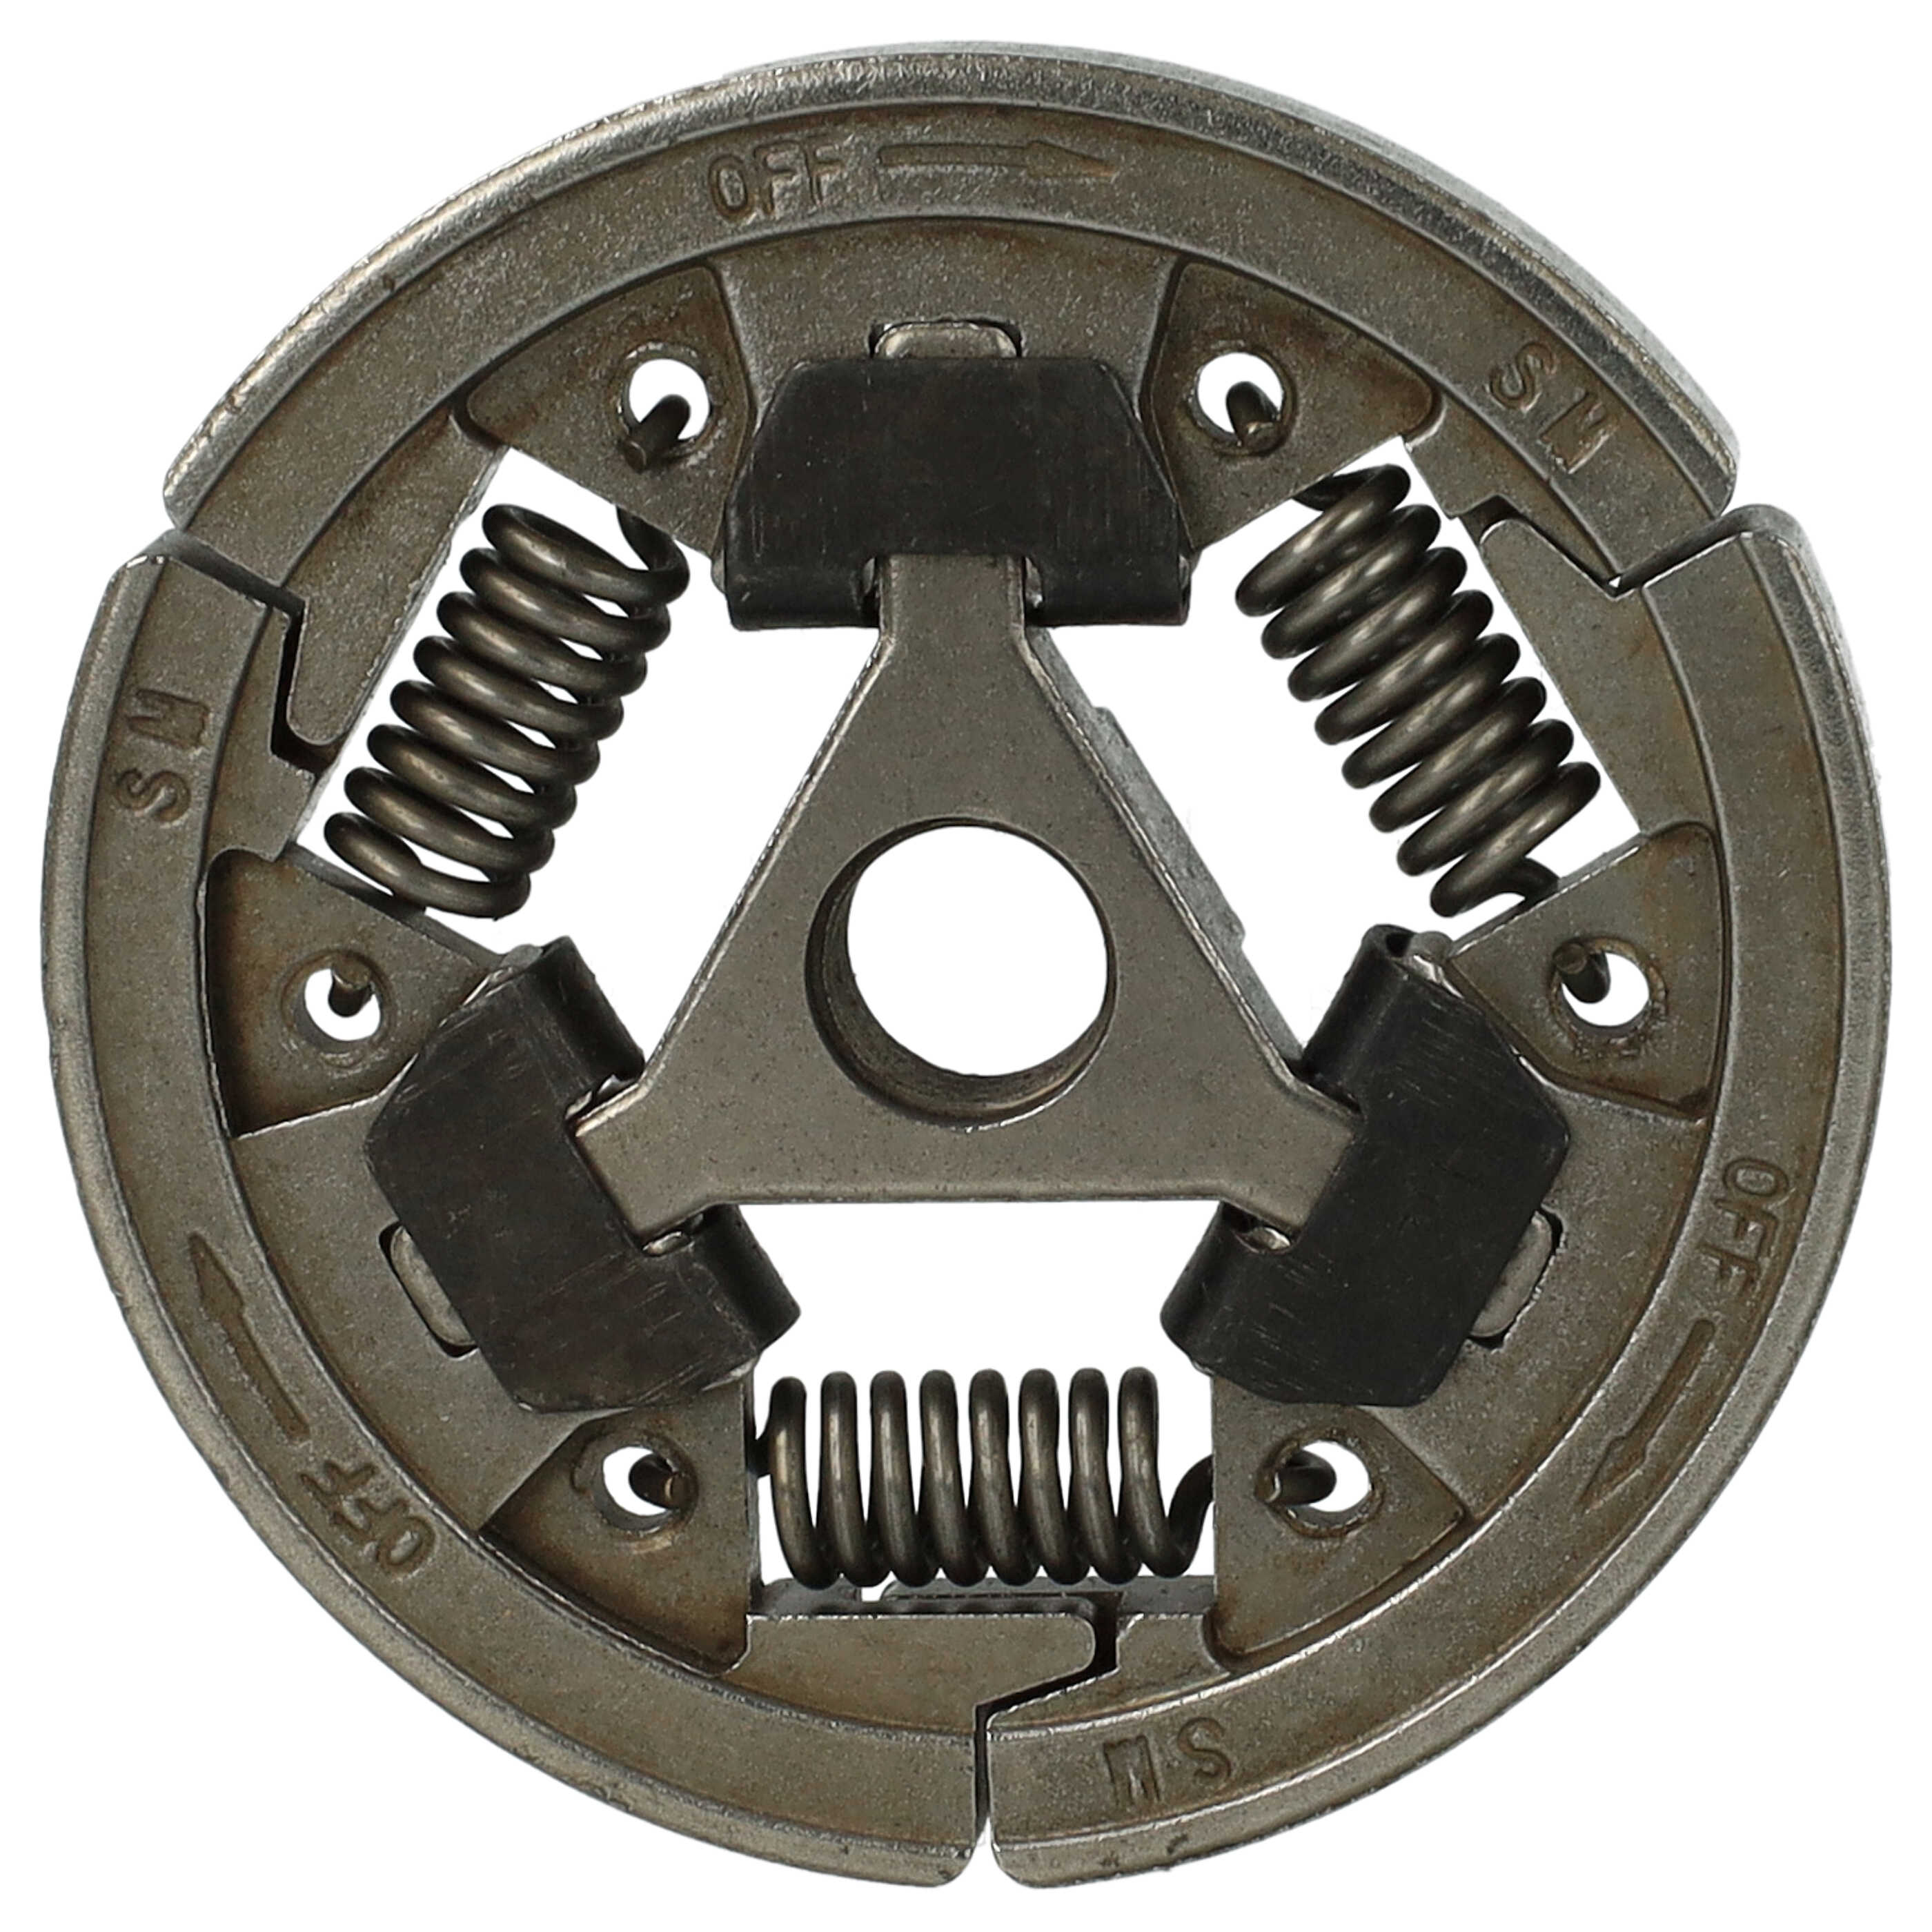 Centrifugal Clutch suitable for Stihl TS420 Chainsaws etc. - iron / 65Mn steel, 7.4 cm Diameter, 1.6 cm Thickn